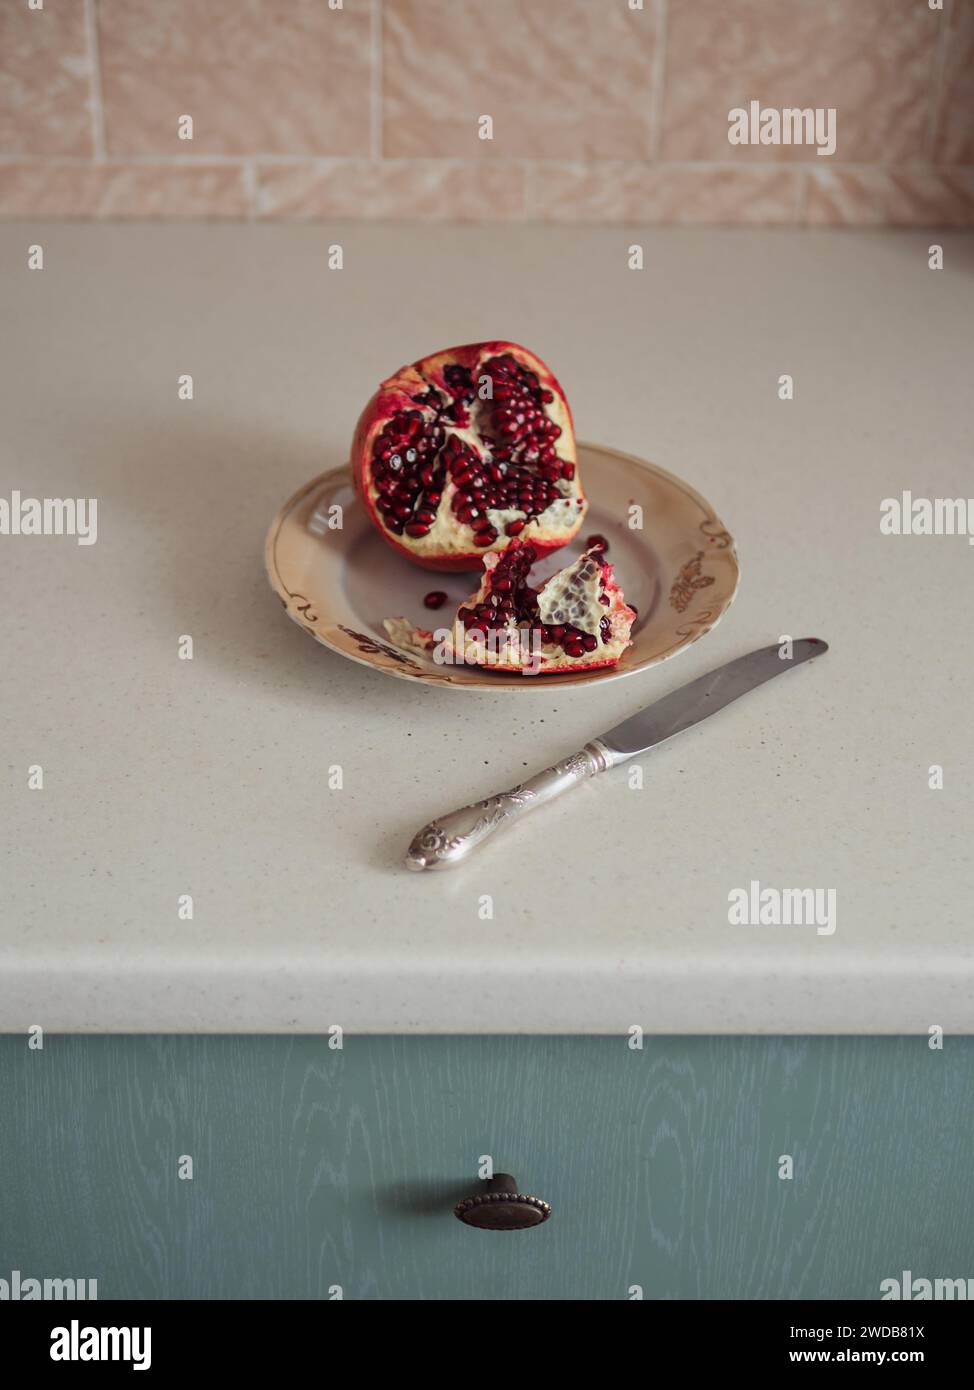 Vertical close up view of an open pomegranate on a plate against the white table and pastel pink wall. A part of turquoise coloured drawer in the fram Stock Photo